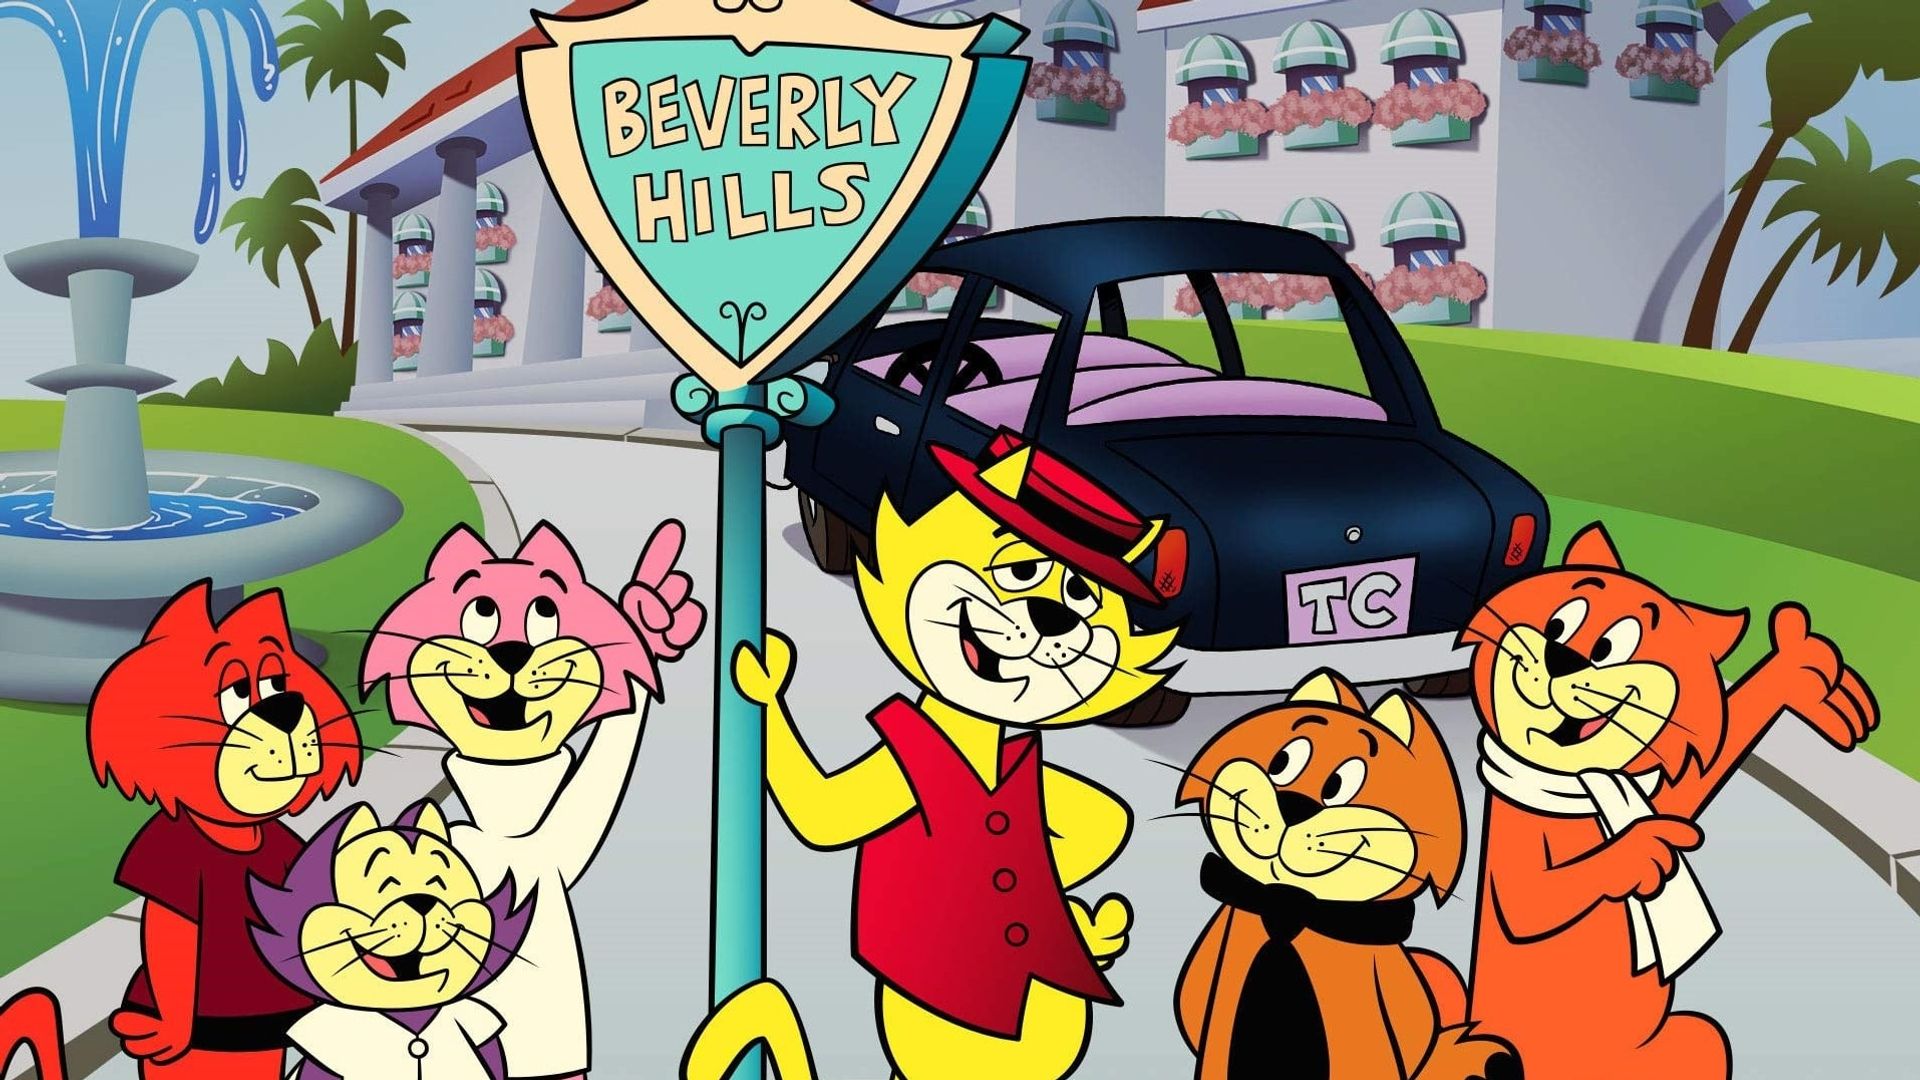 Top Cat and the Beverly Hills Cats background